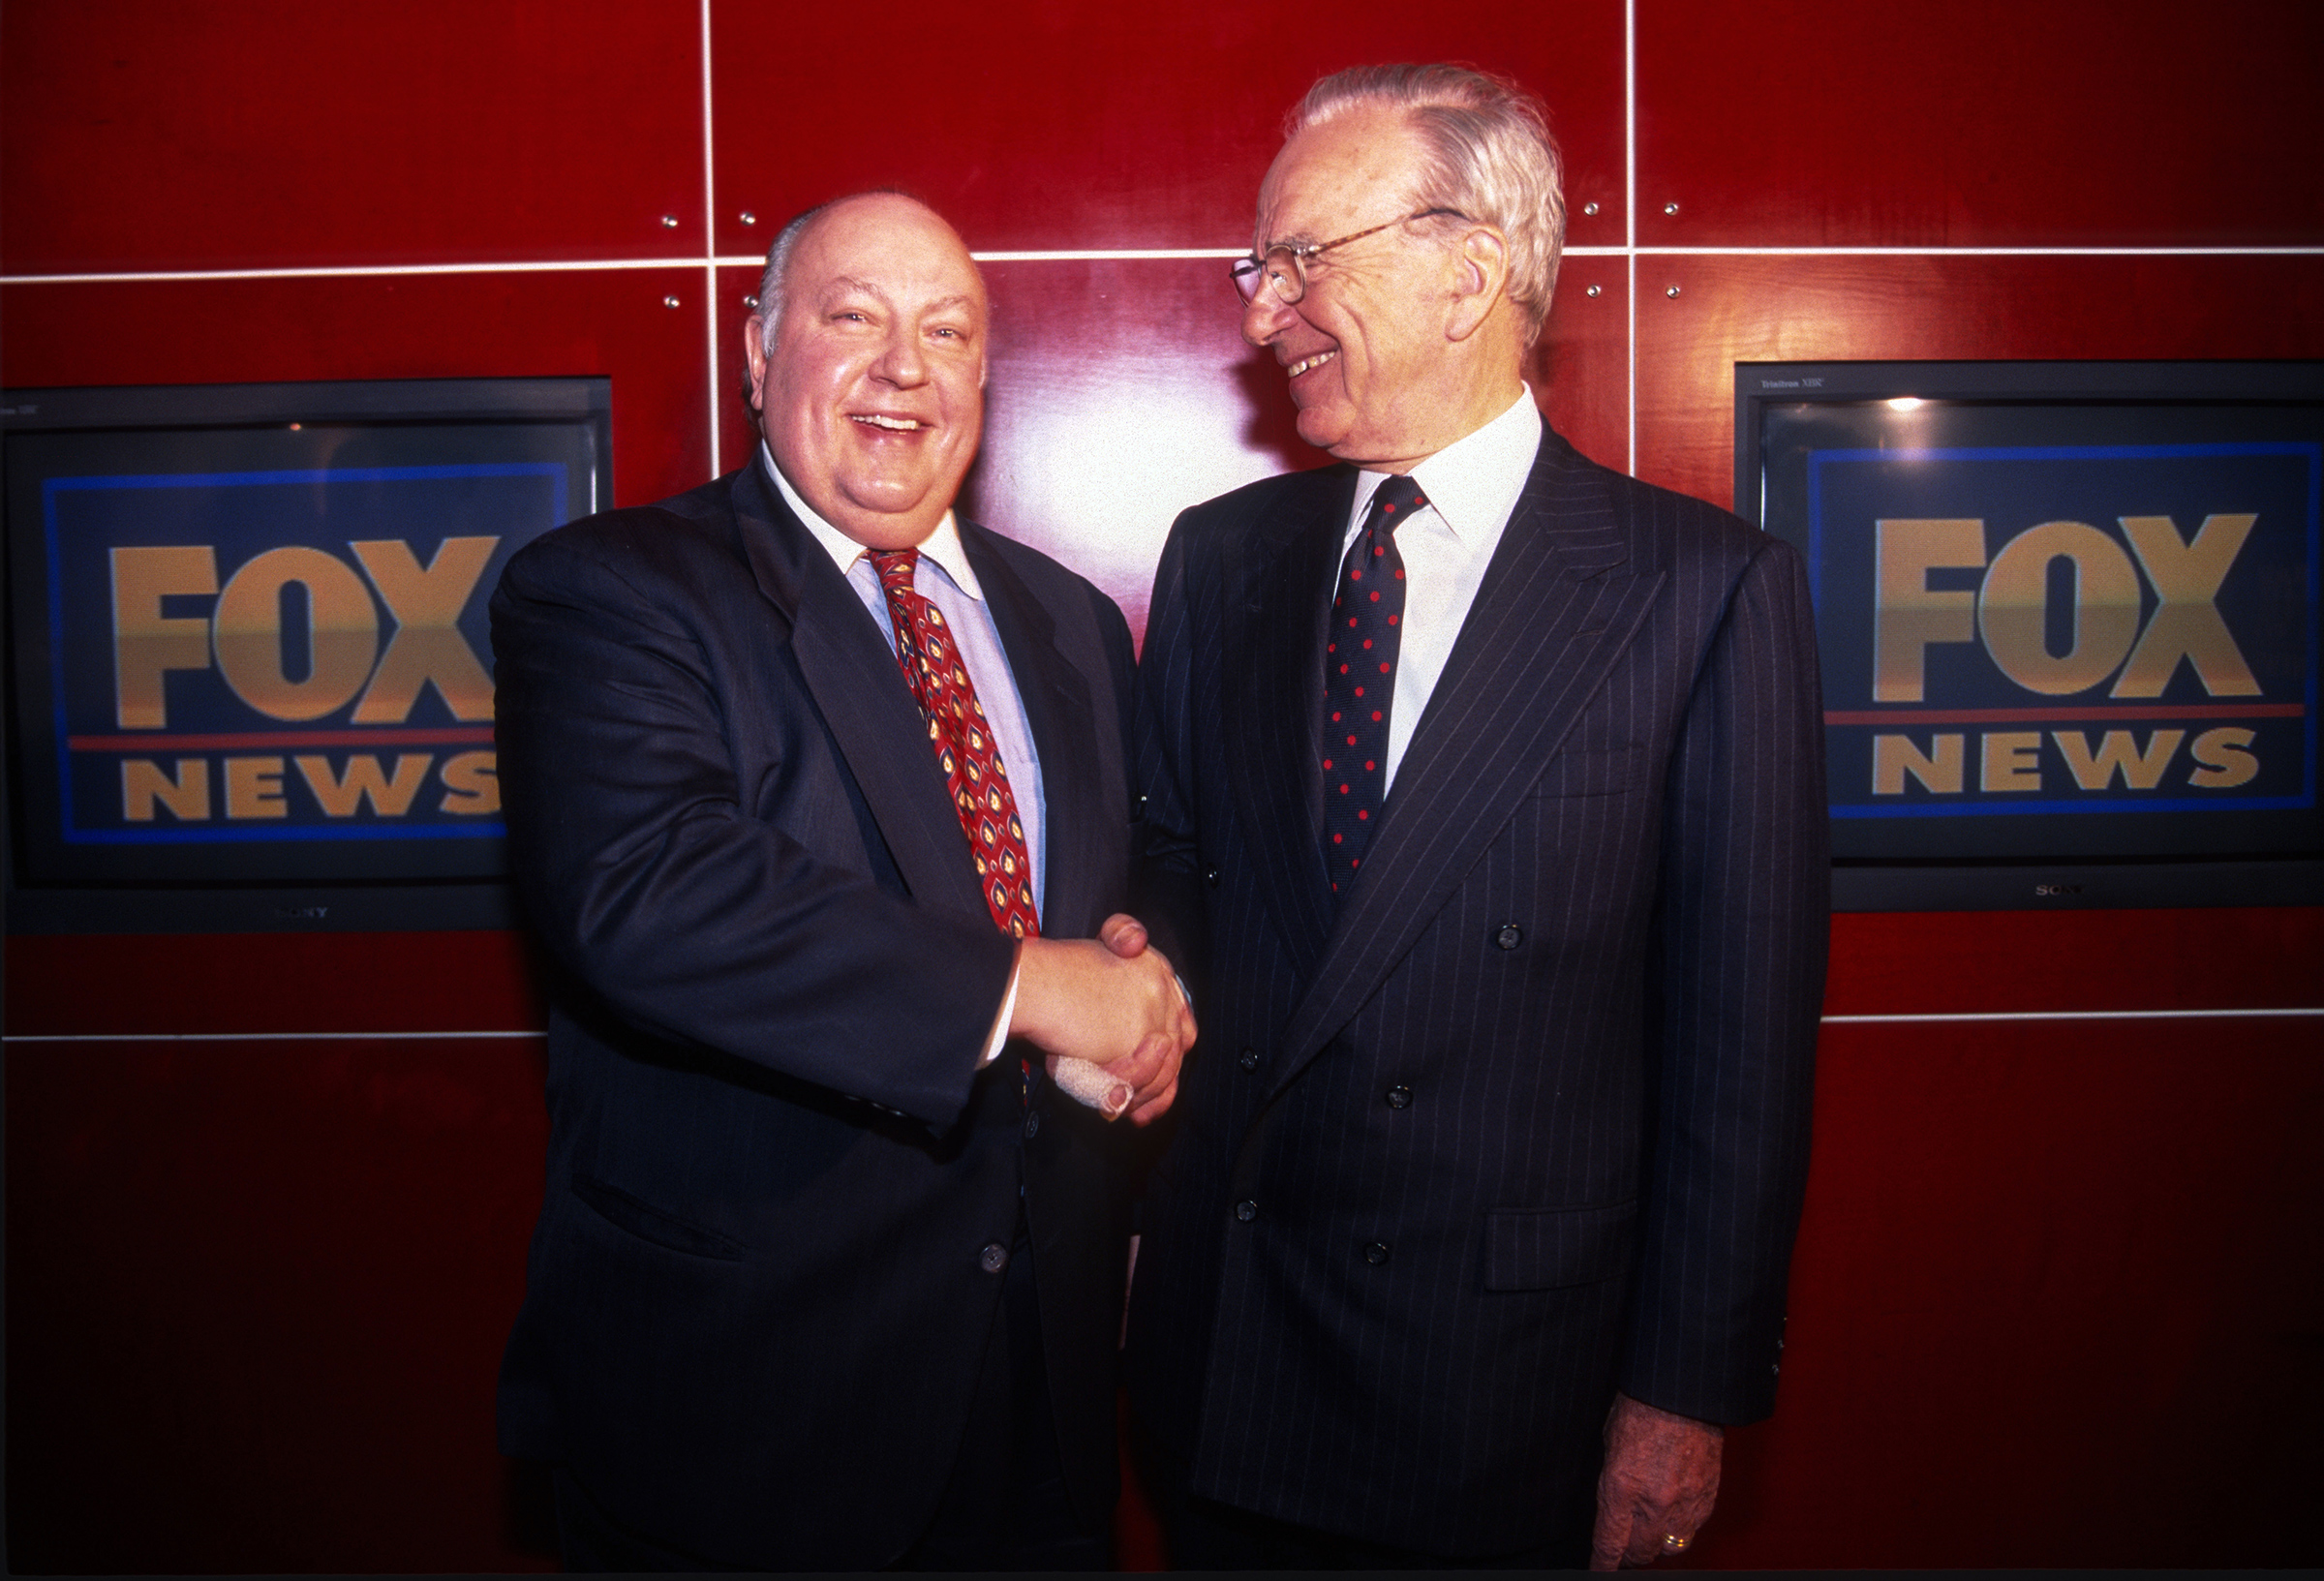 Rupert Murdoch shakes hands with Roger Ailes after naming Ailes the head of Fox News in New York City, Jan. 1996 (Allan Tannenbaum—Getty Images)